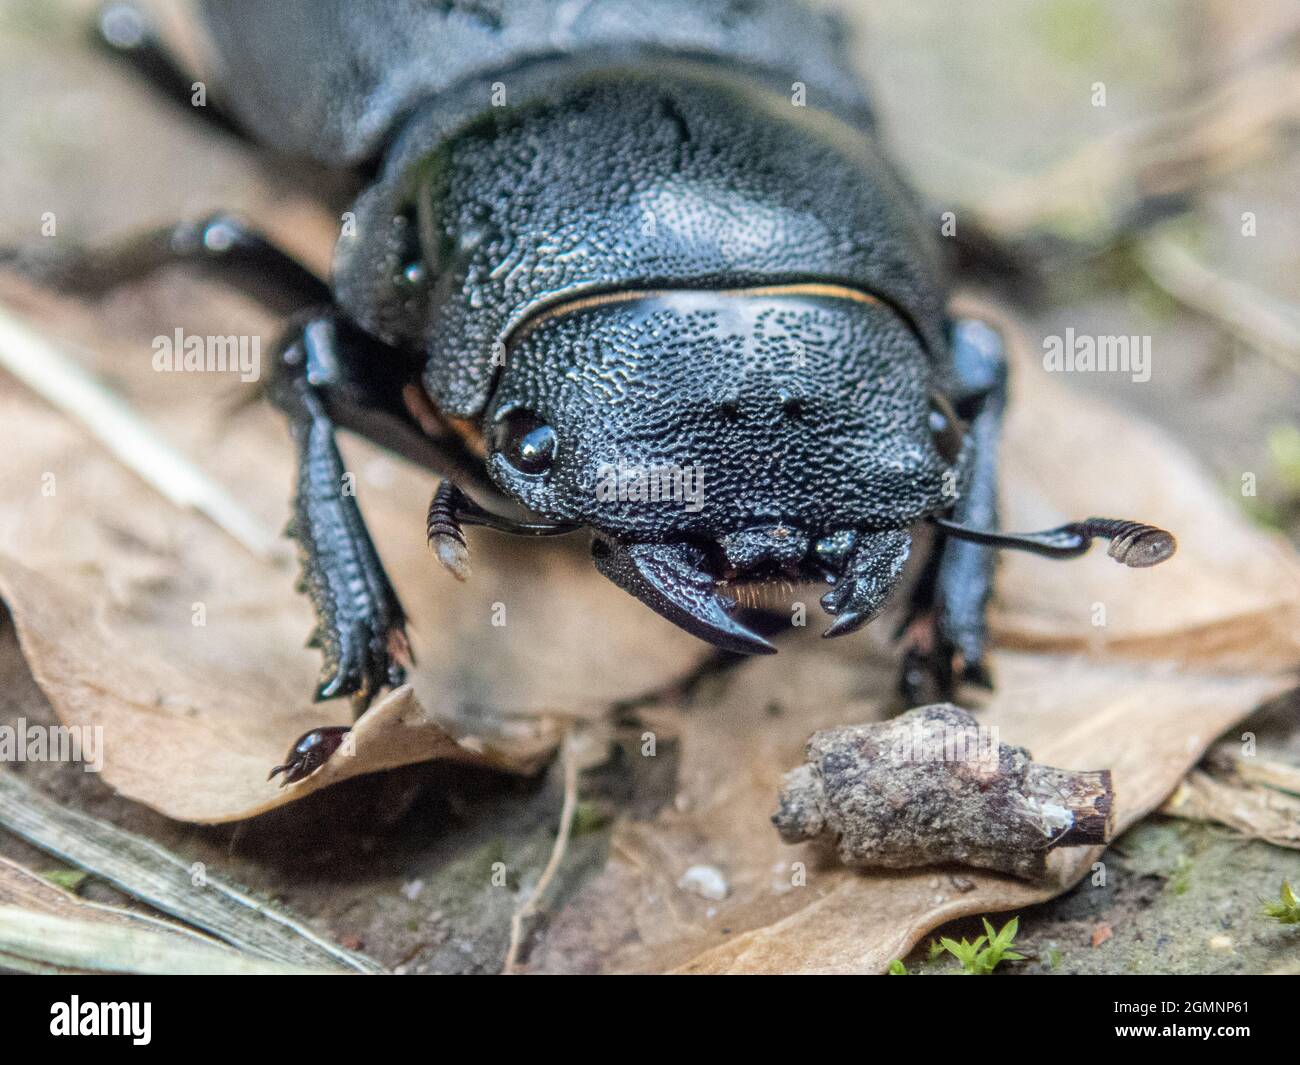 Lesser Stag Beetle, Dorcus parallelipipedus, black beetle prowling on leaves. Wield, Hampshire, UK Stock Photo